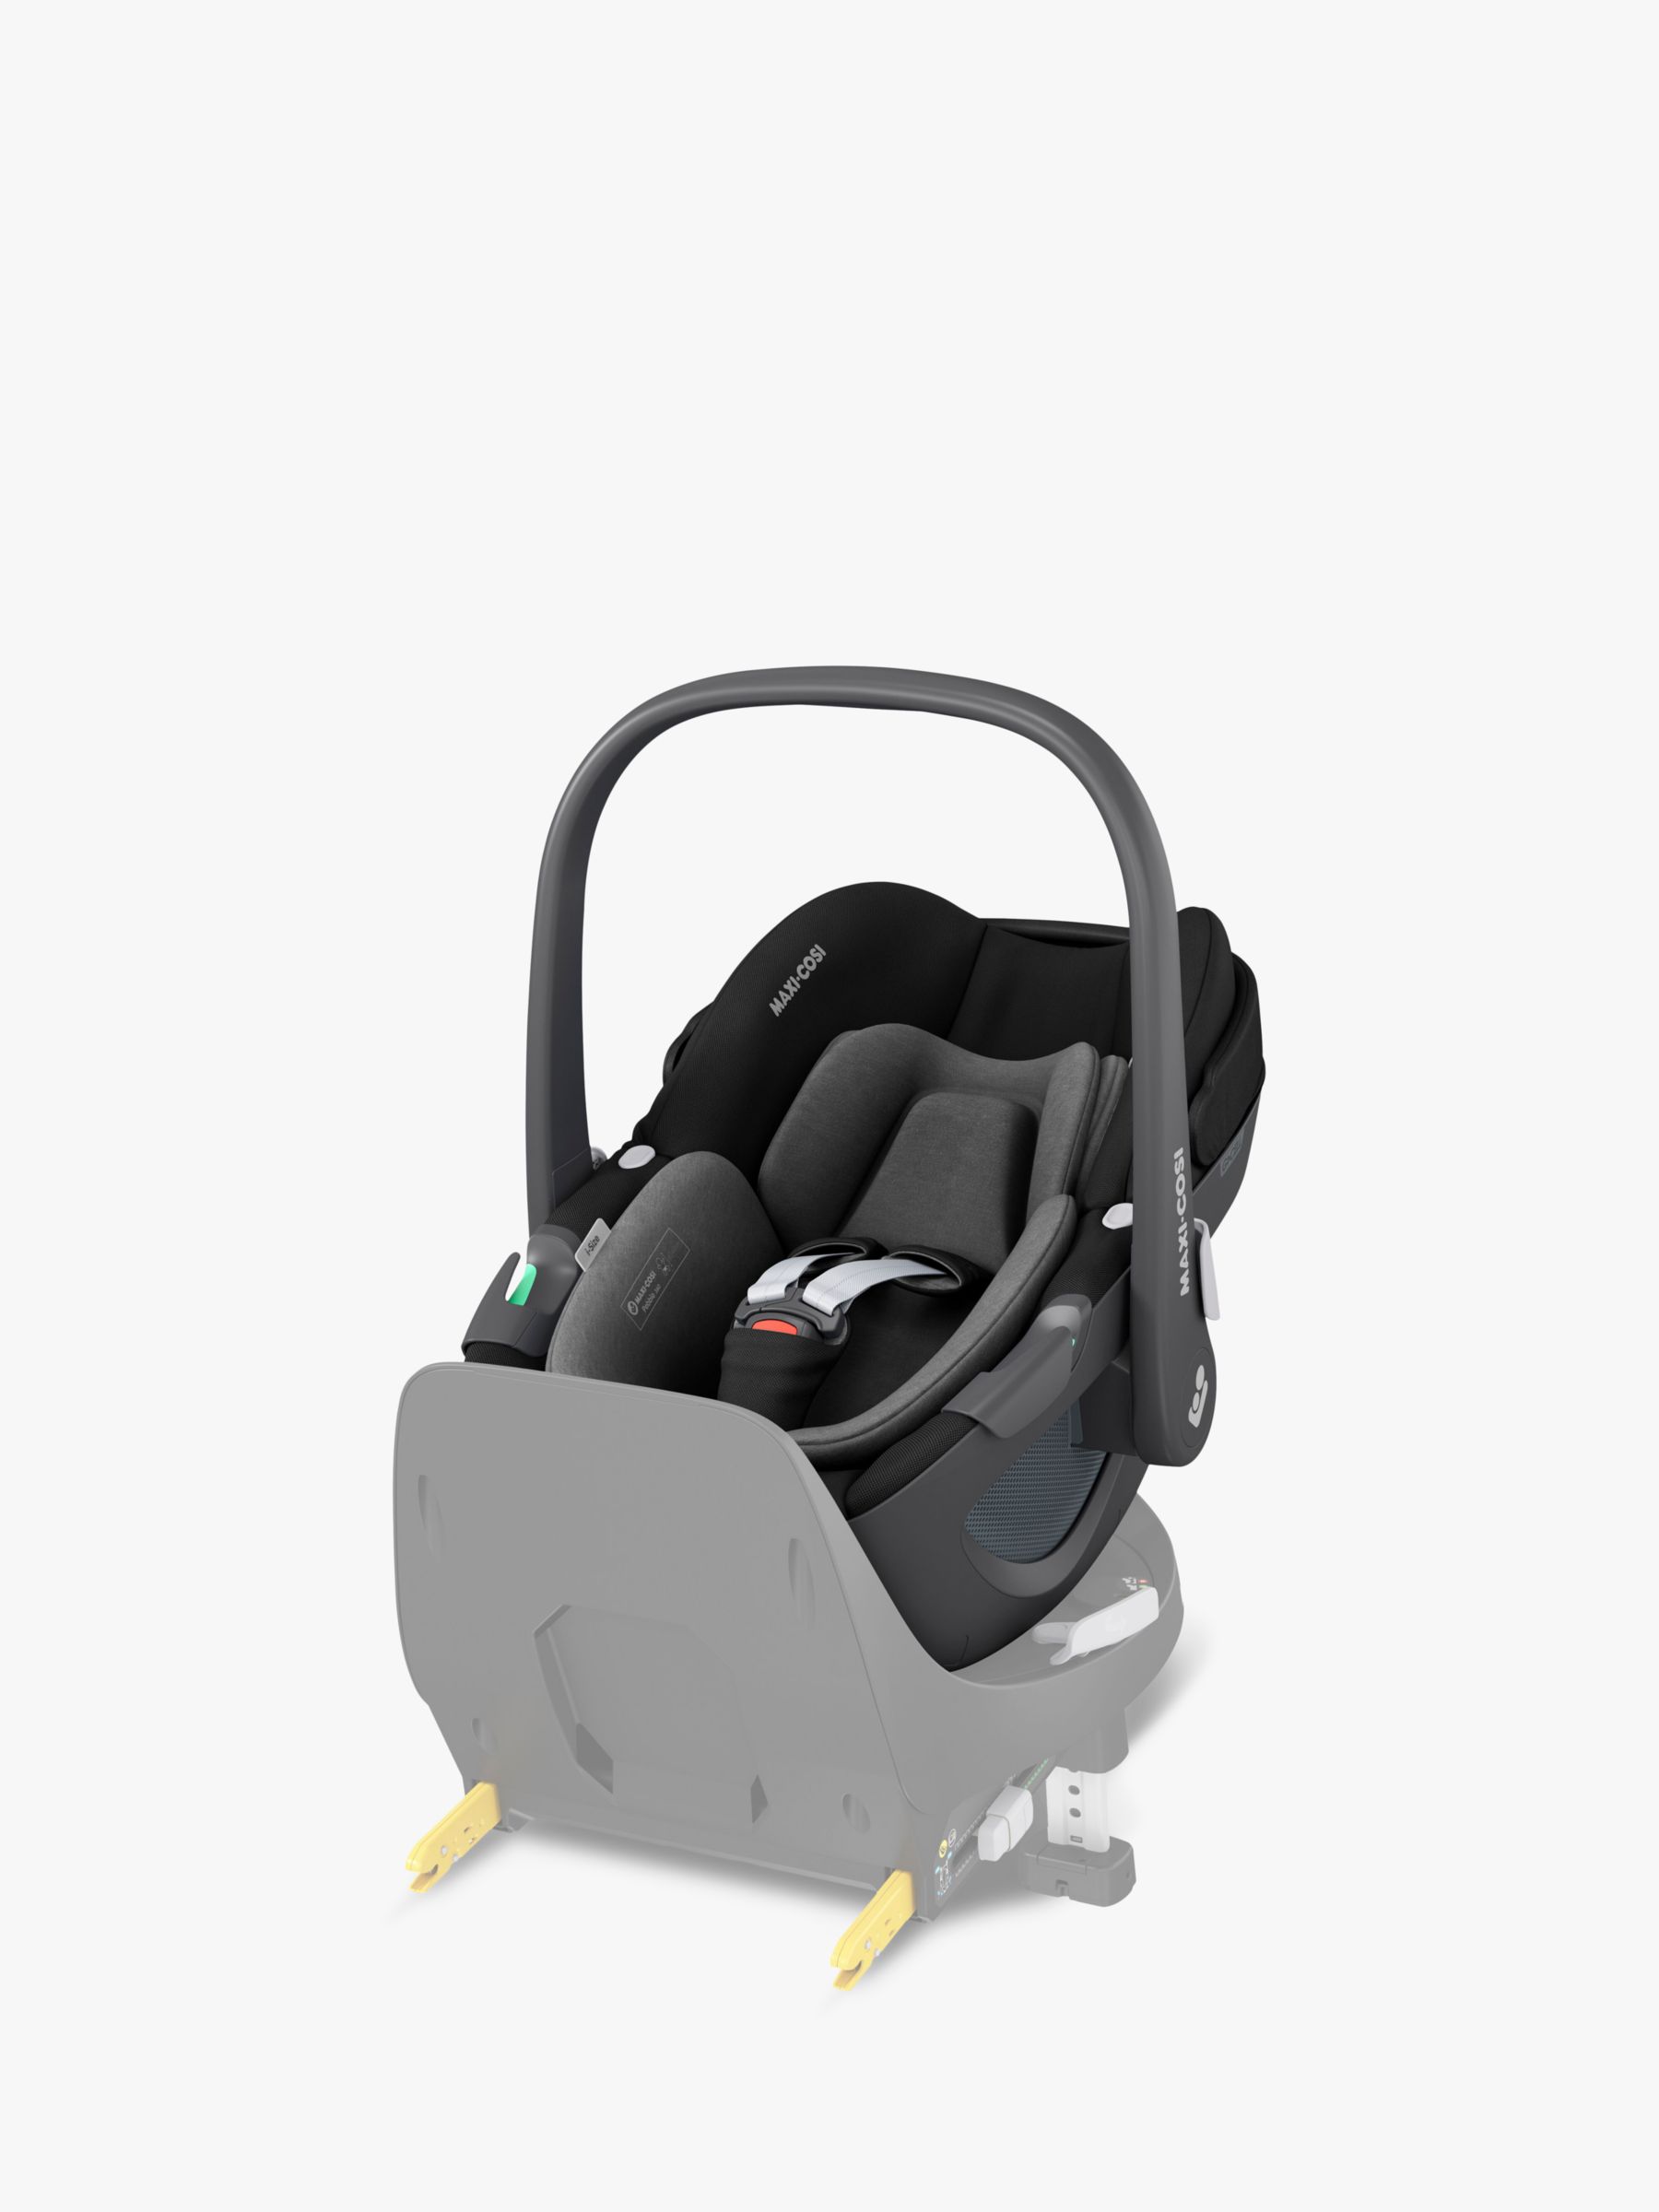 iCandy Peach 7 Pushchair & Accessories with Maxi-Cosi Pebble 360 i-Size Car Seat and FamilyFix 360 Base Bundle, Ivy/ Black